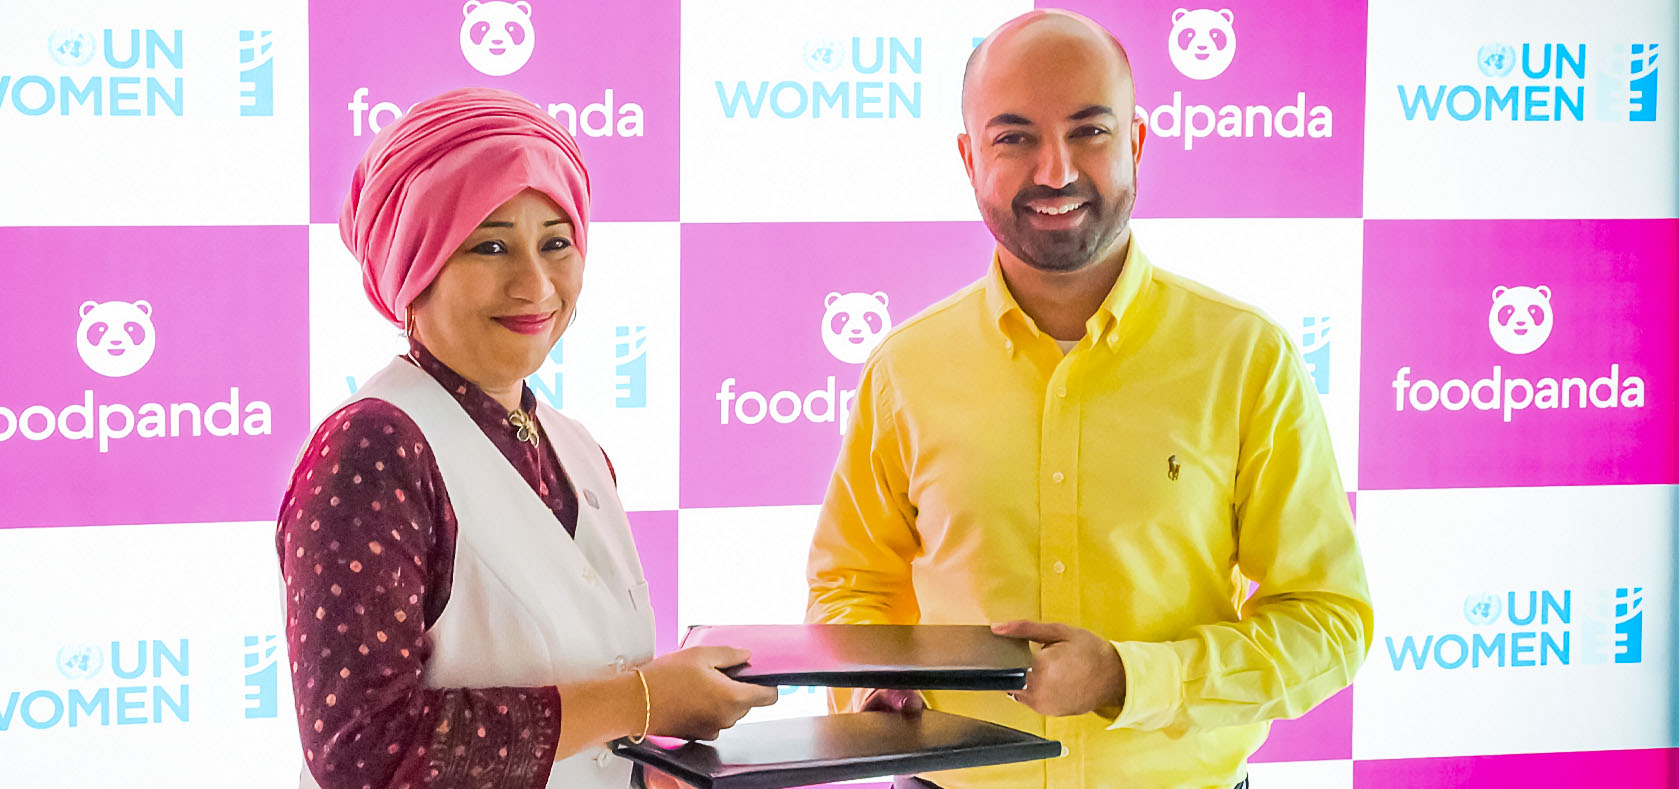 UN Women Pakistan and foodpanda Pakistan collaborate for the promotion of workplace safety and gender equality for women